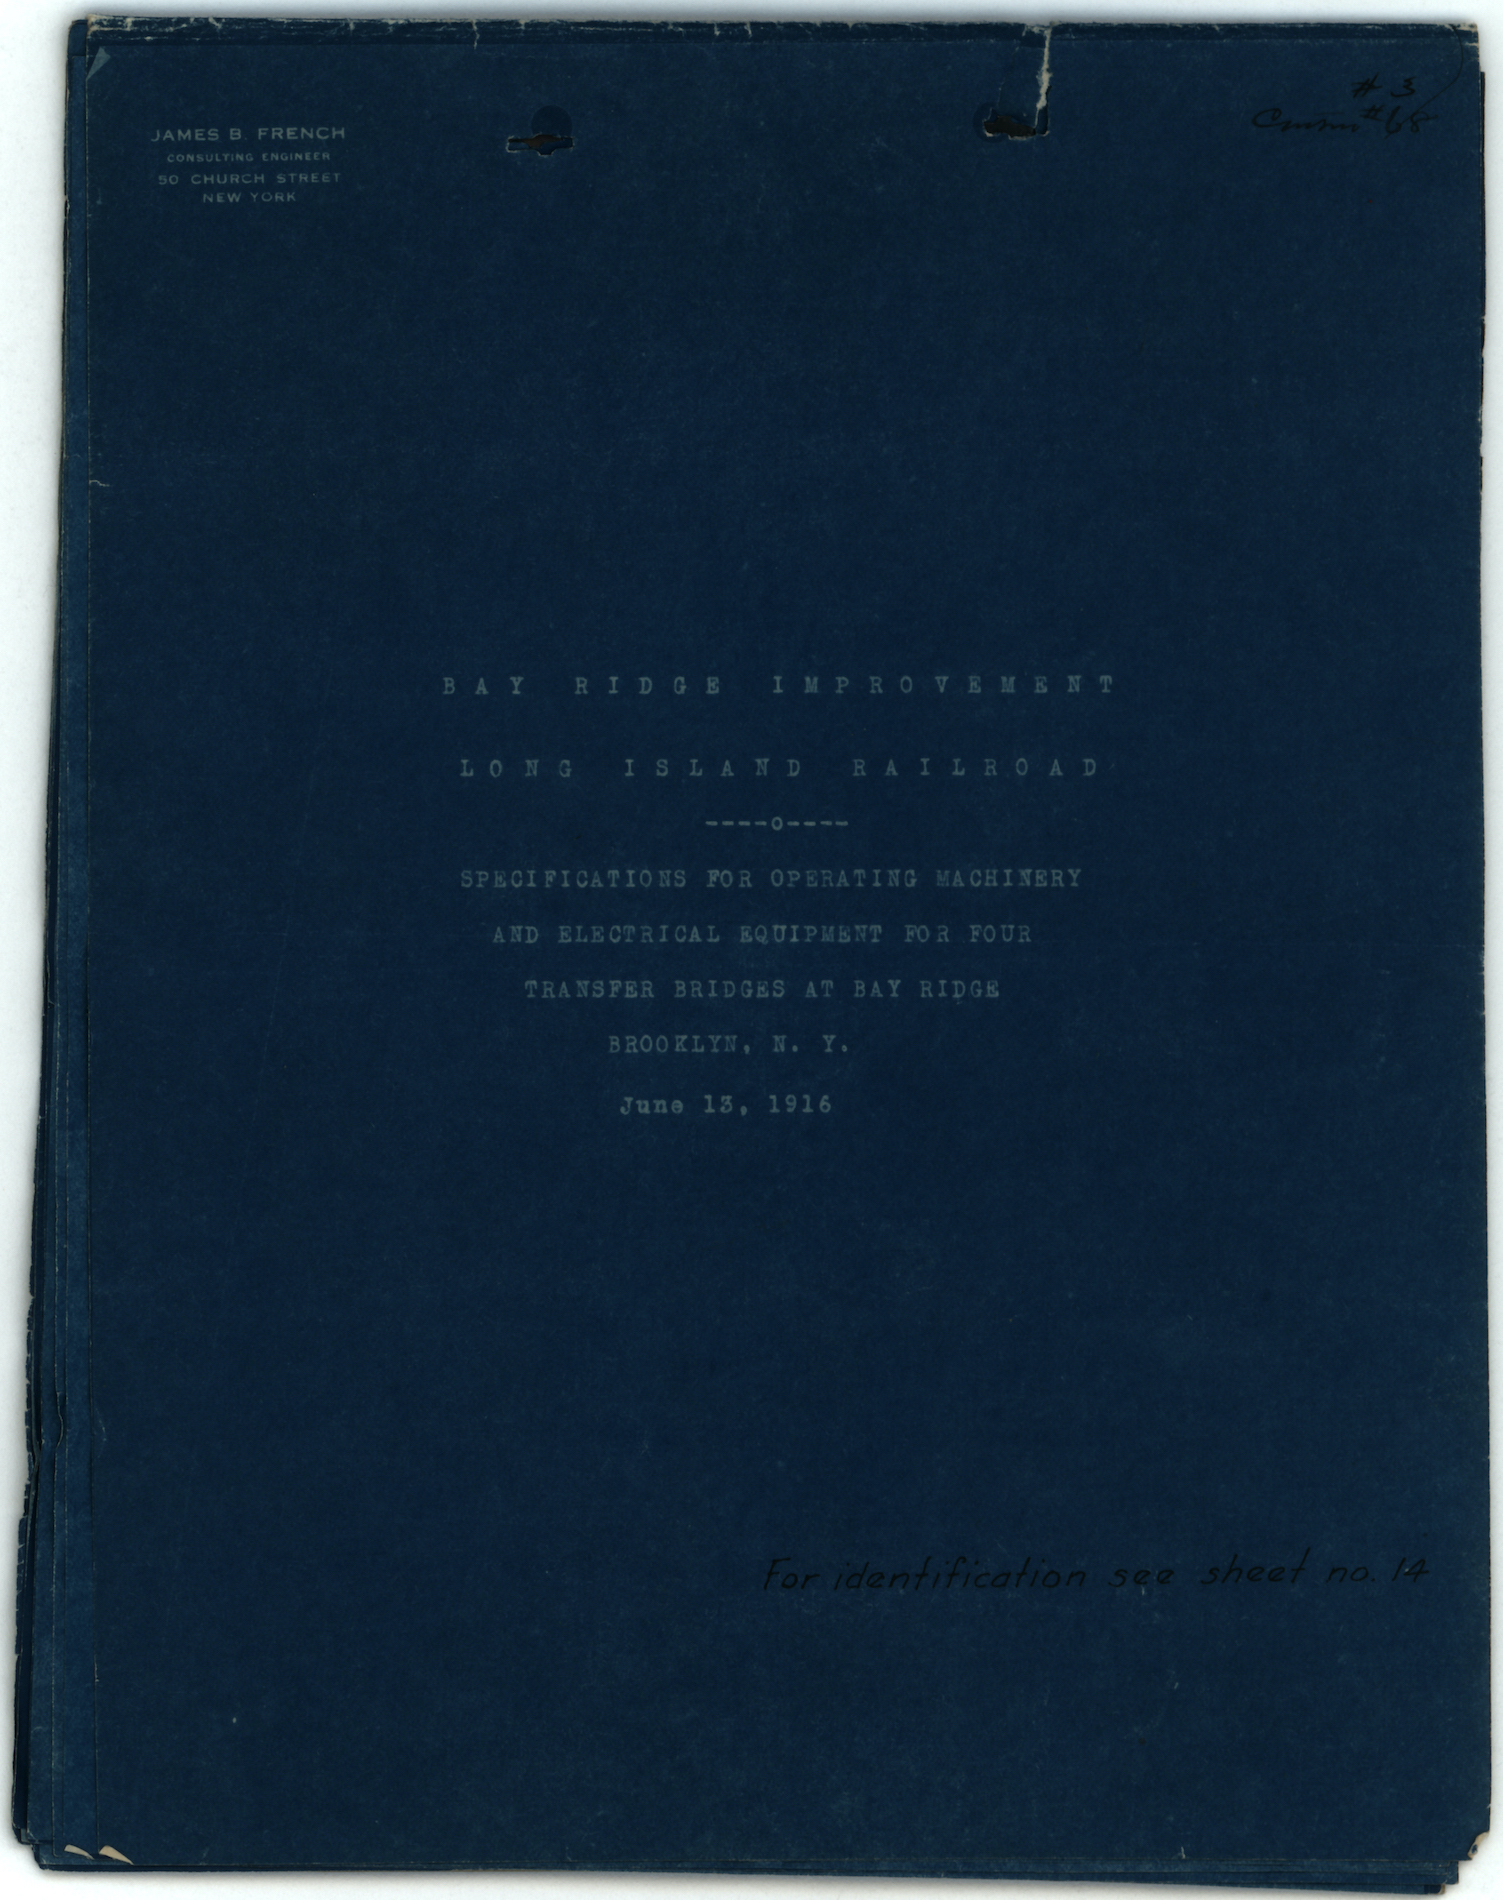 “Bay Ridge Improvement Long Island Railroad: Specifications for Operating Machinery and Electrical Equipment for Four Transfer Bridges at Bay Ridge, Brooklyn, N.Y. June 13, 1916.”